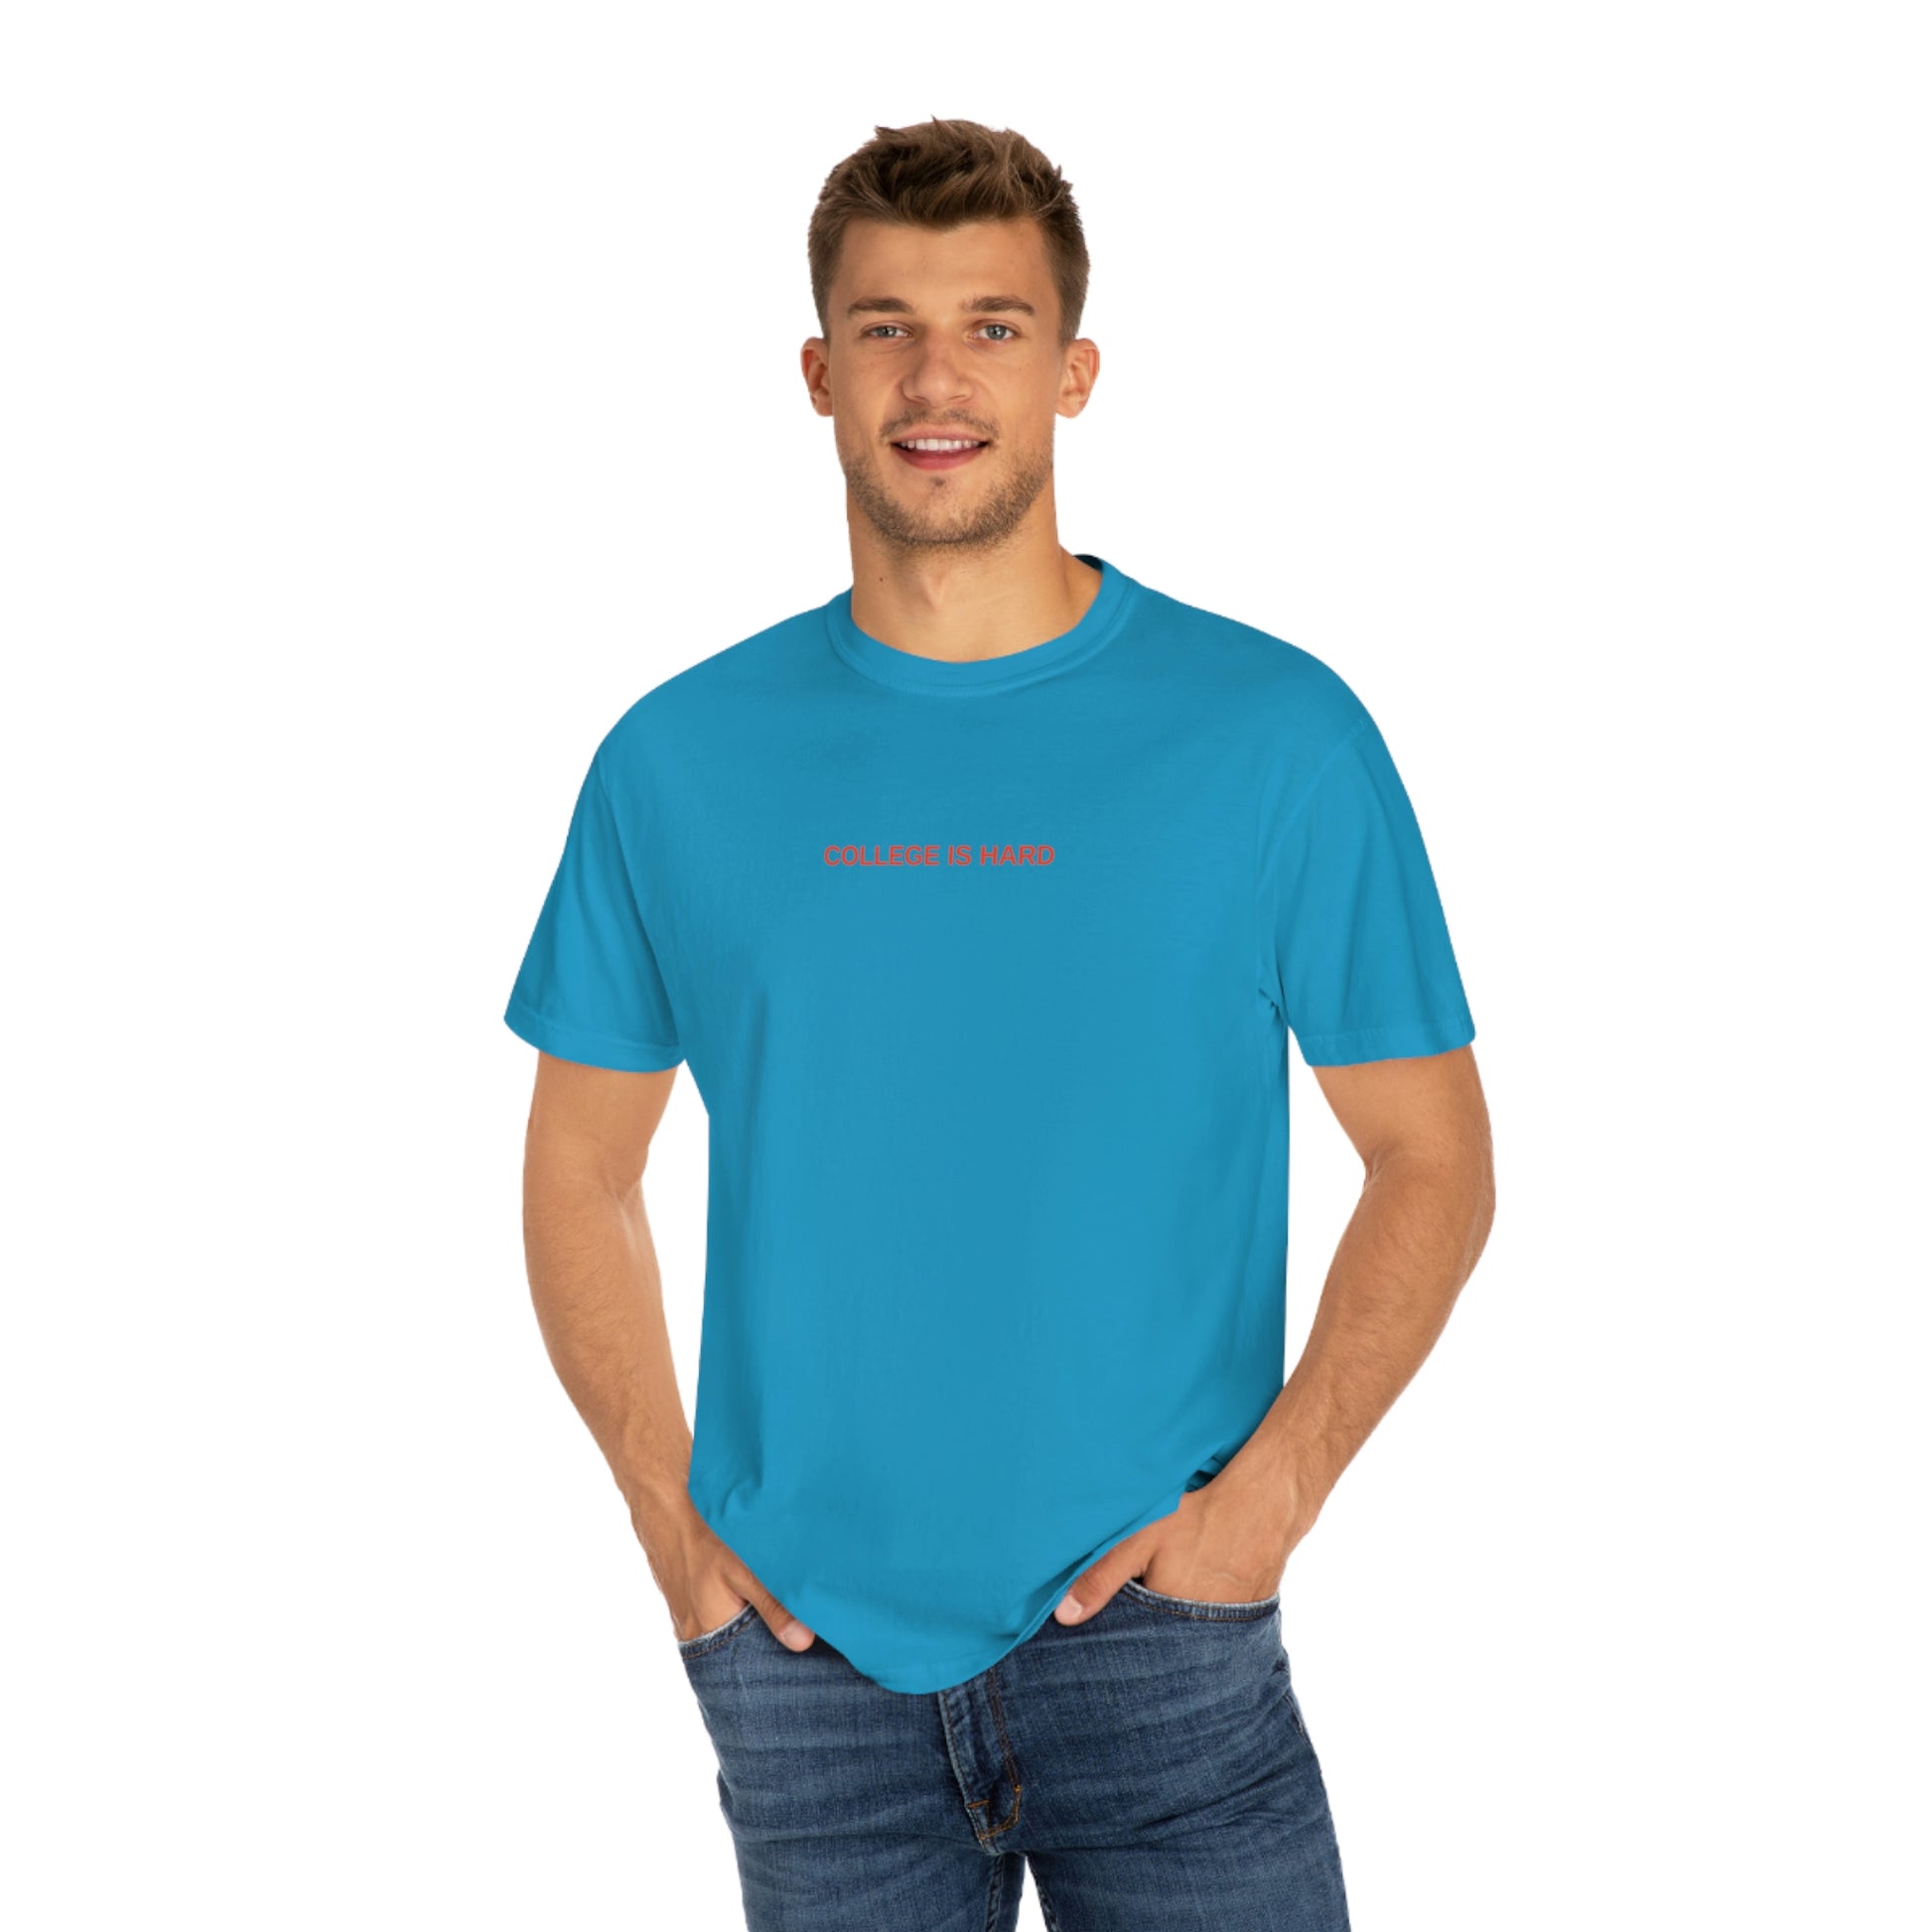 COLLEGE IS HARD Royal caribe gameday t-shirt